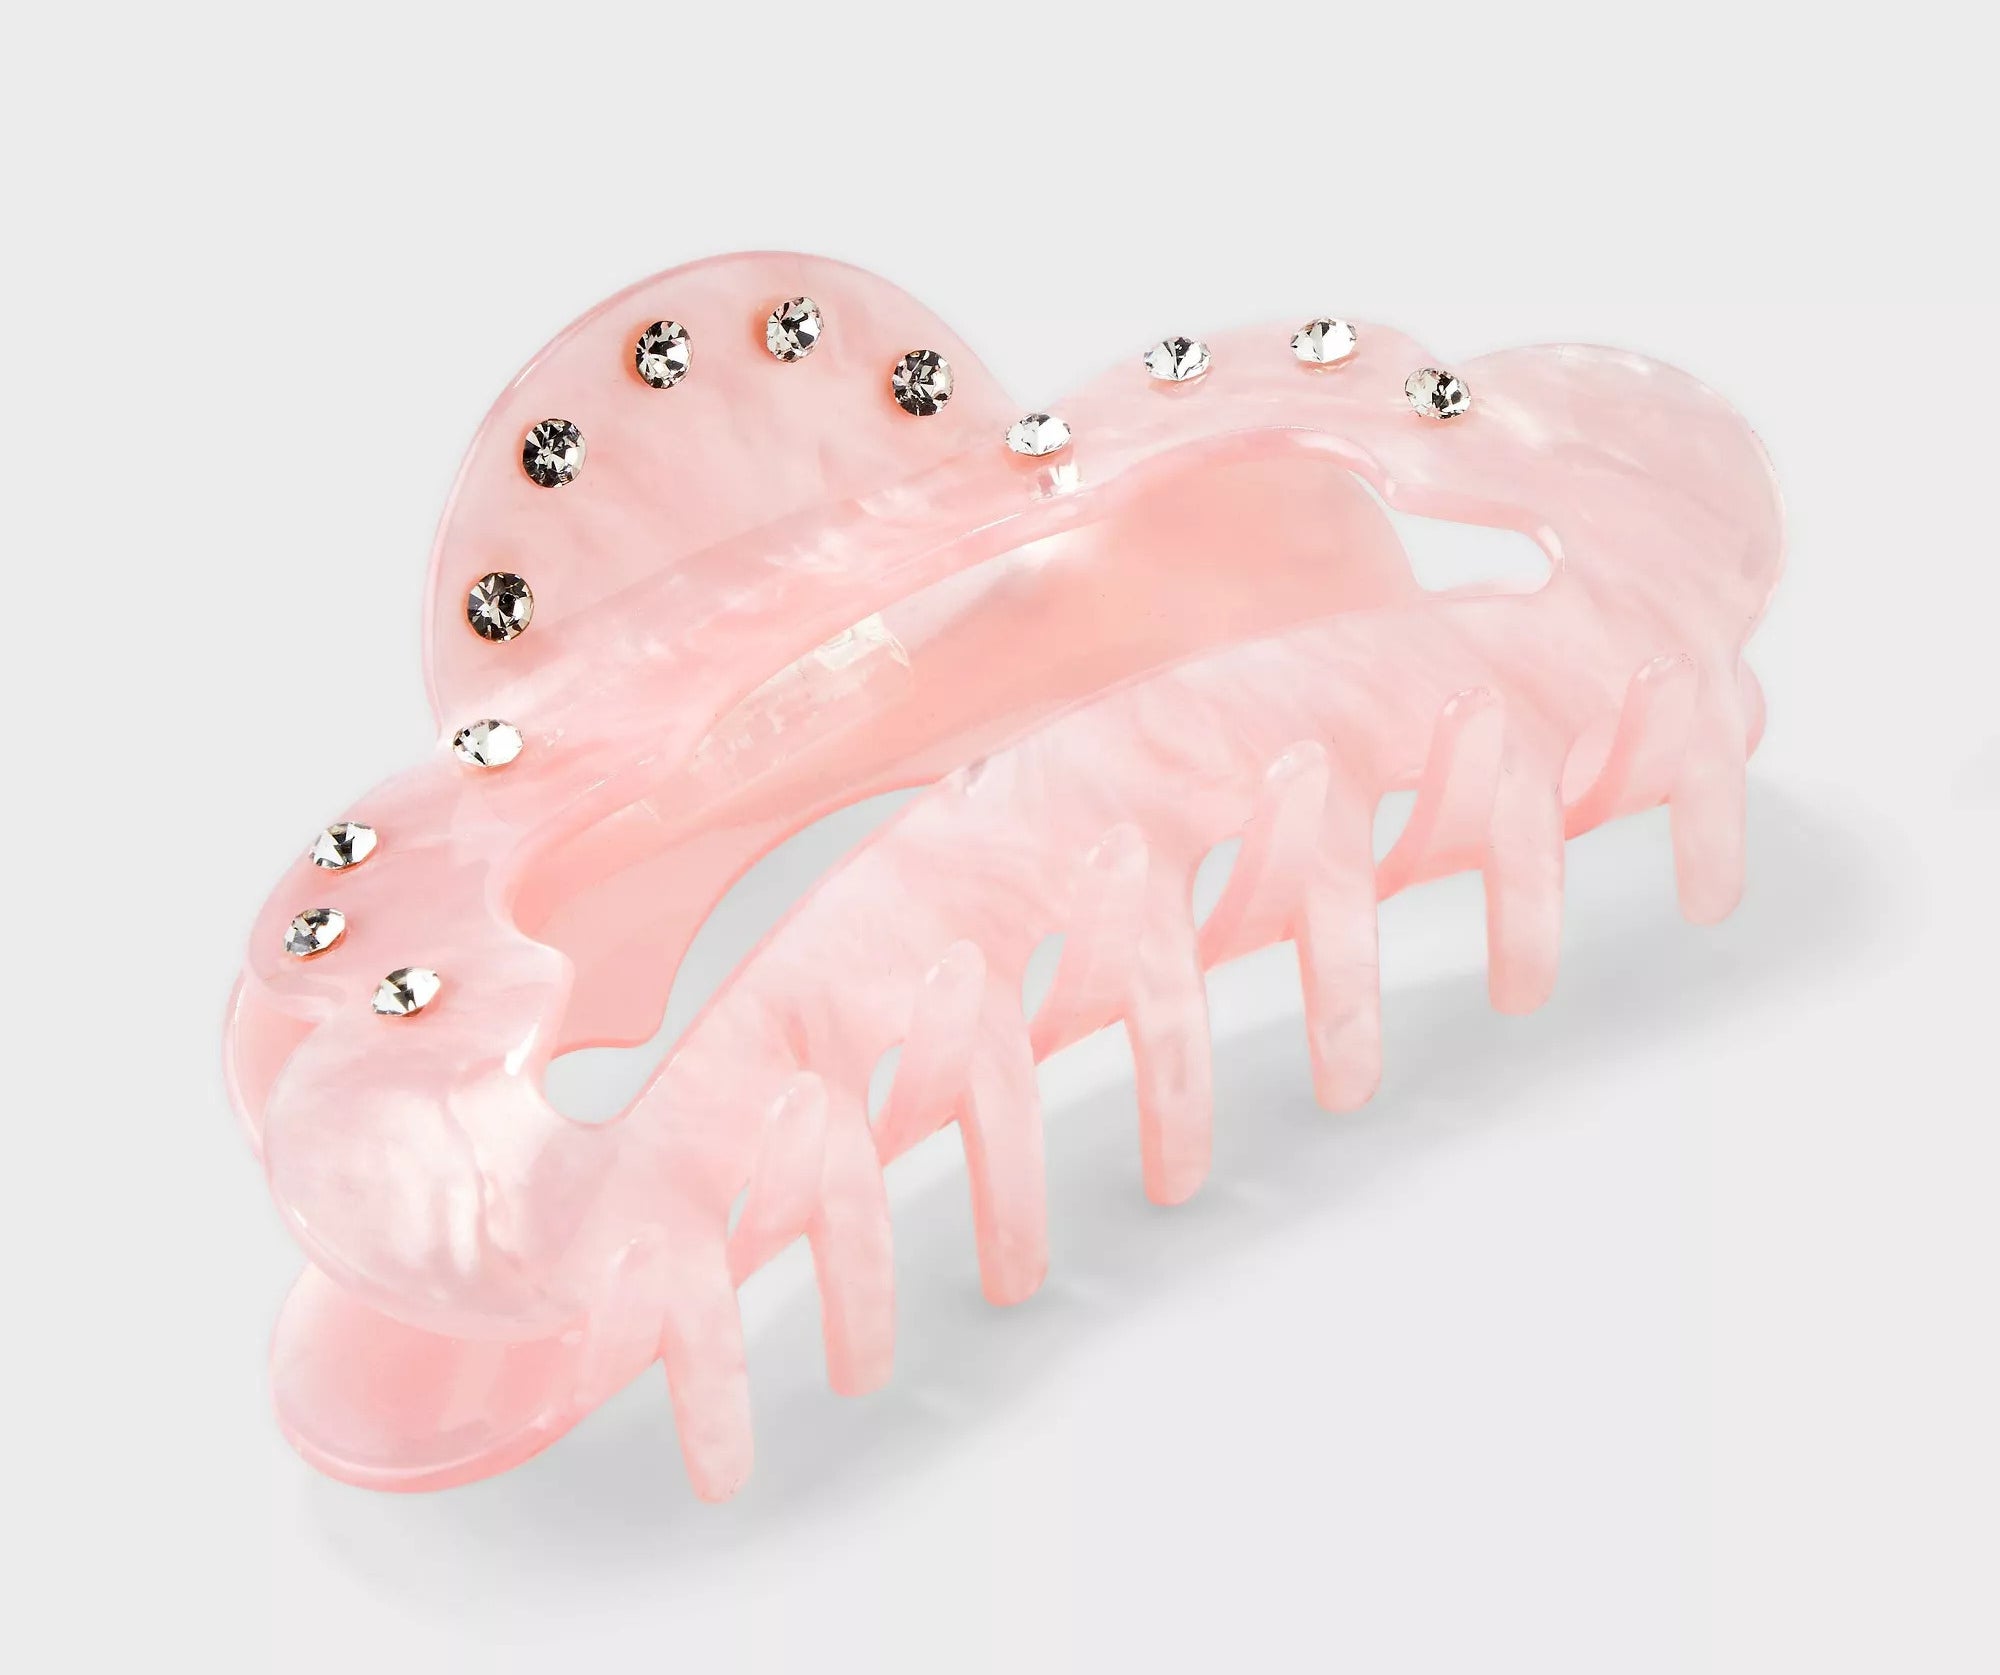 The pink claw in a cloud shape decorated with rhinestone accents